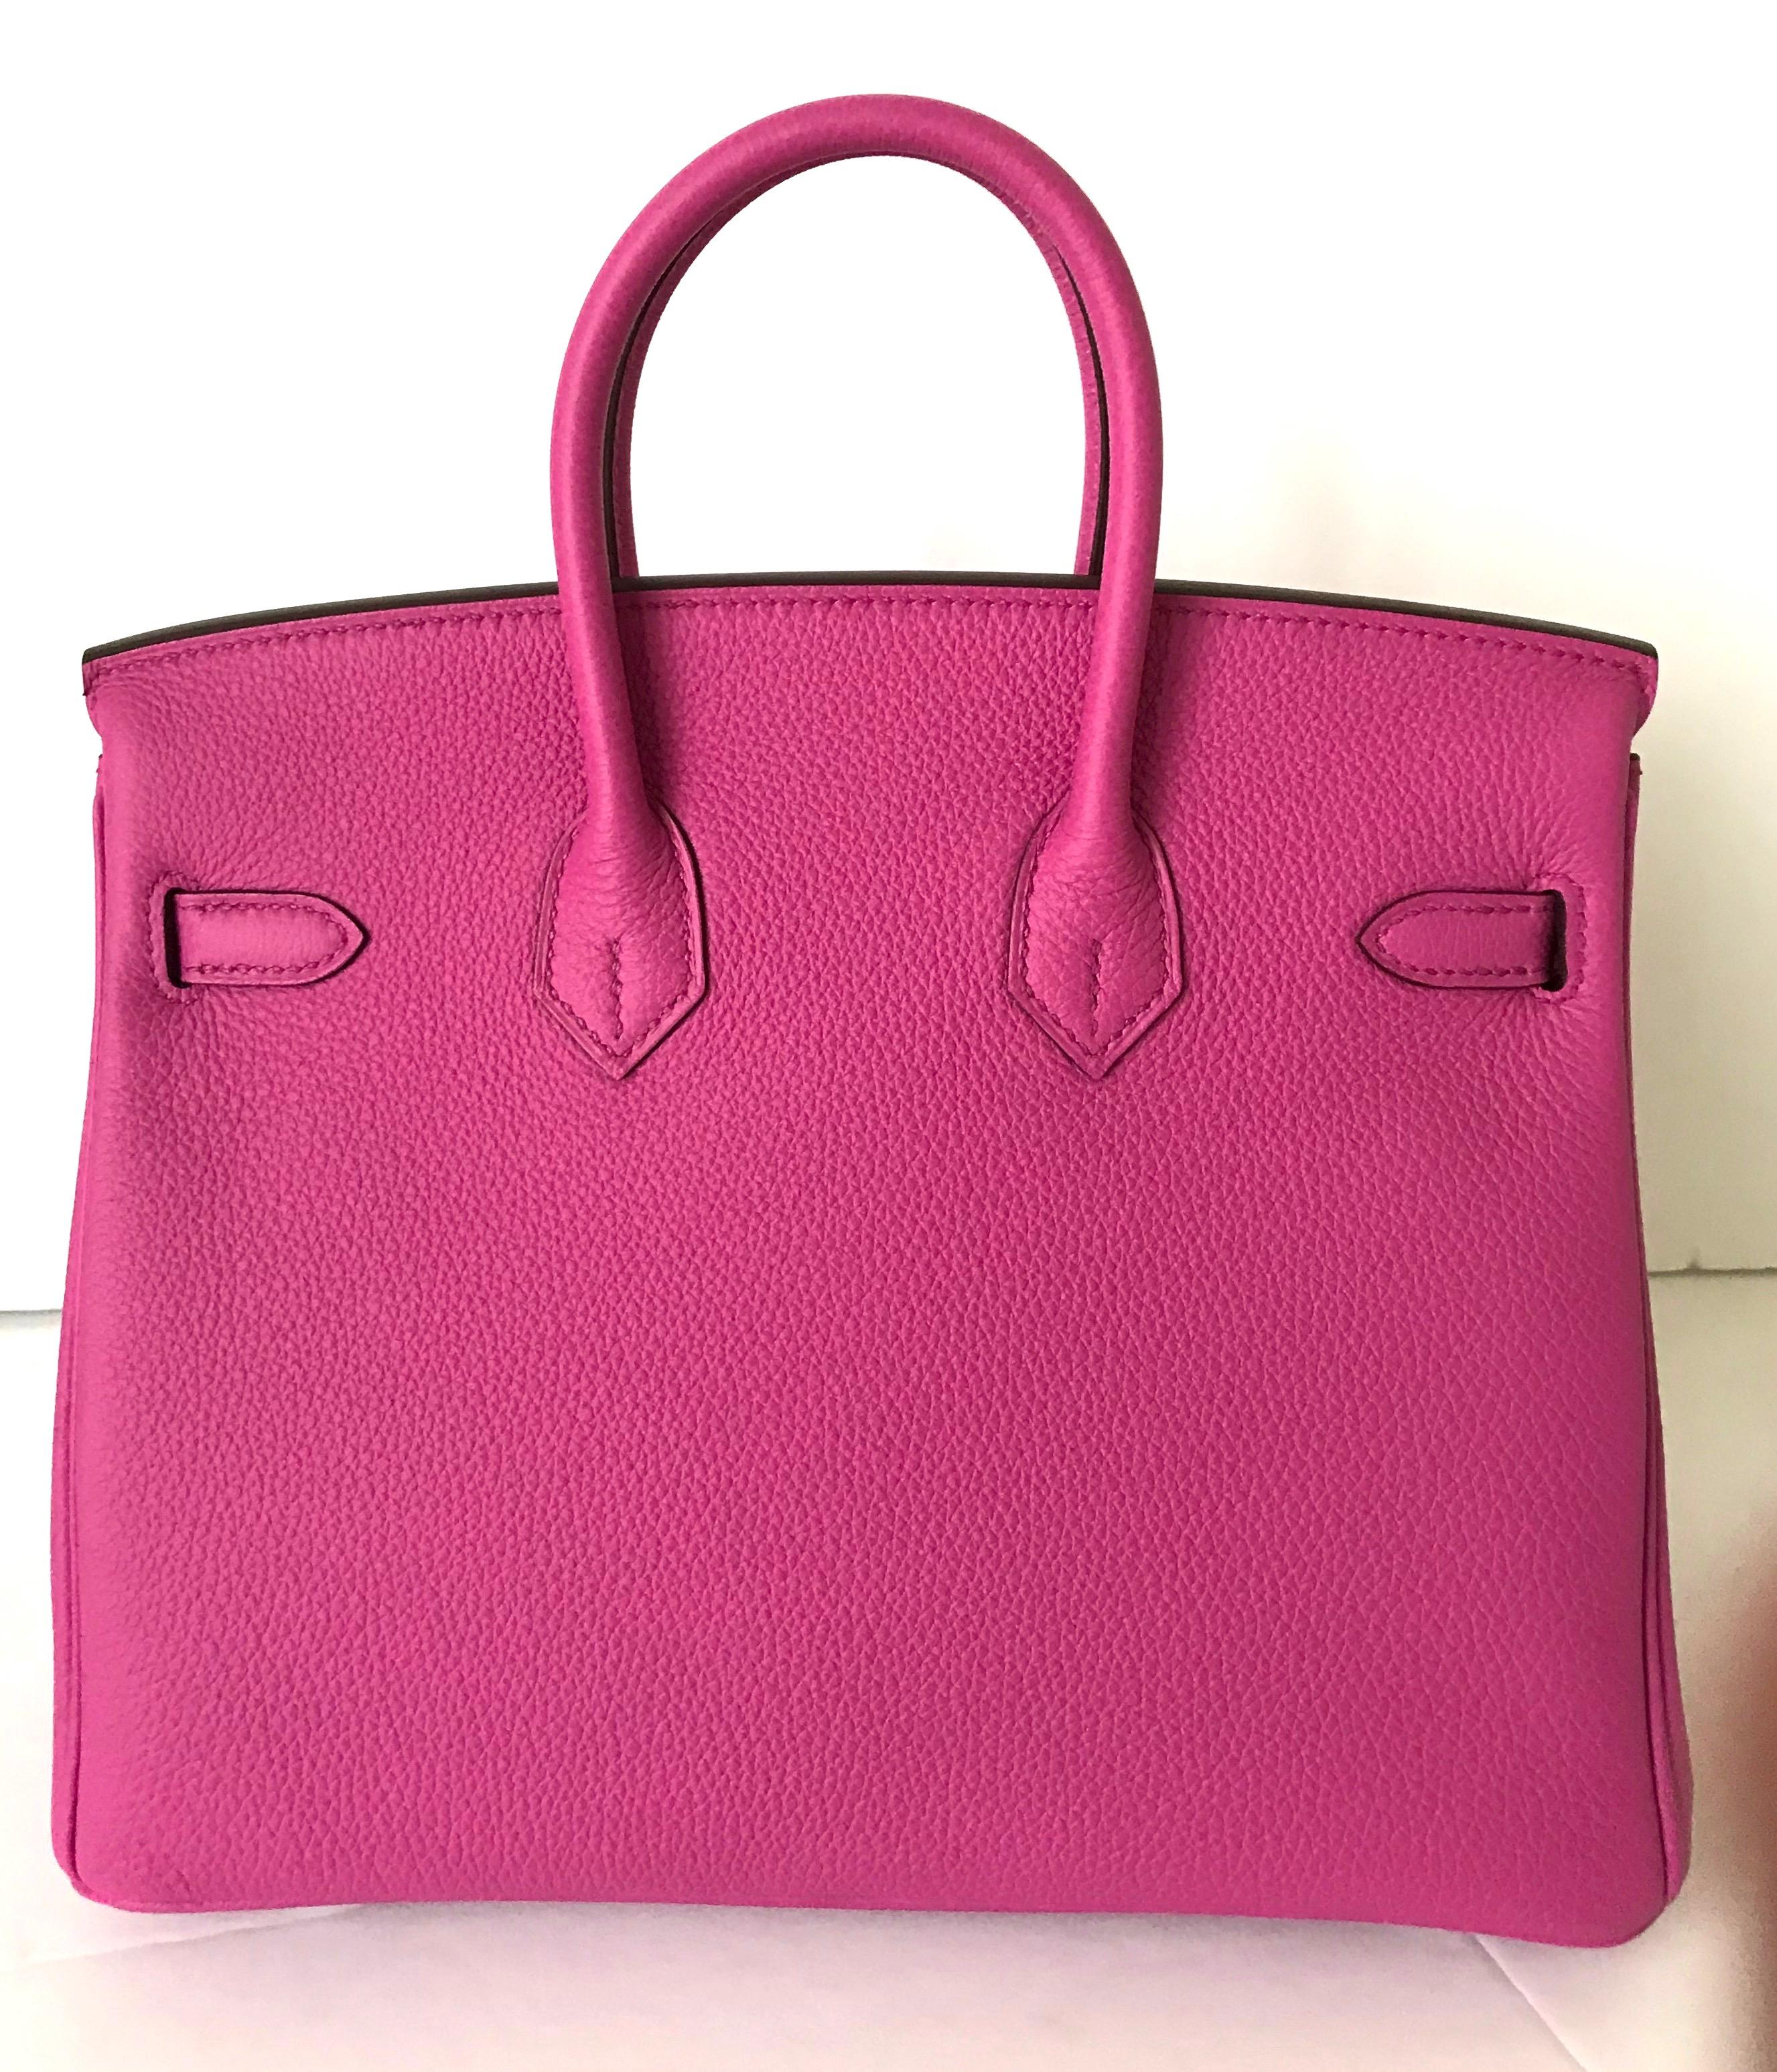 Hermes Birkin 25cm Magnolia of Togo Leather with palladium hardware.

This Birkin has tonal stitching, a front toggle closure, a clochette with lock and two keys and a double rolled handles.

The interior is lined with Chevre and has a zip with an